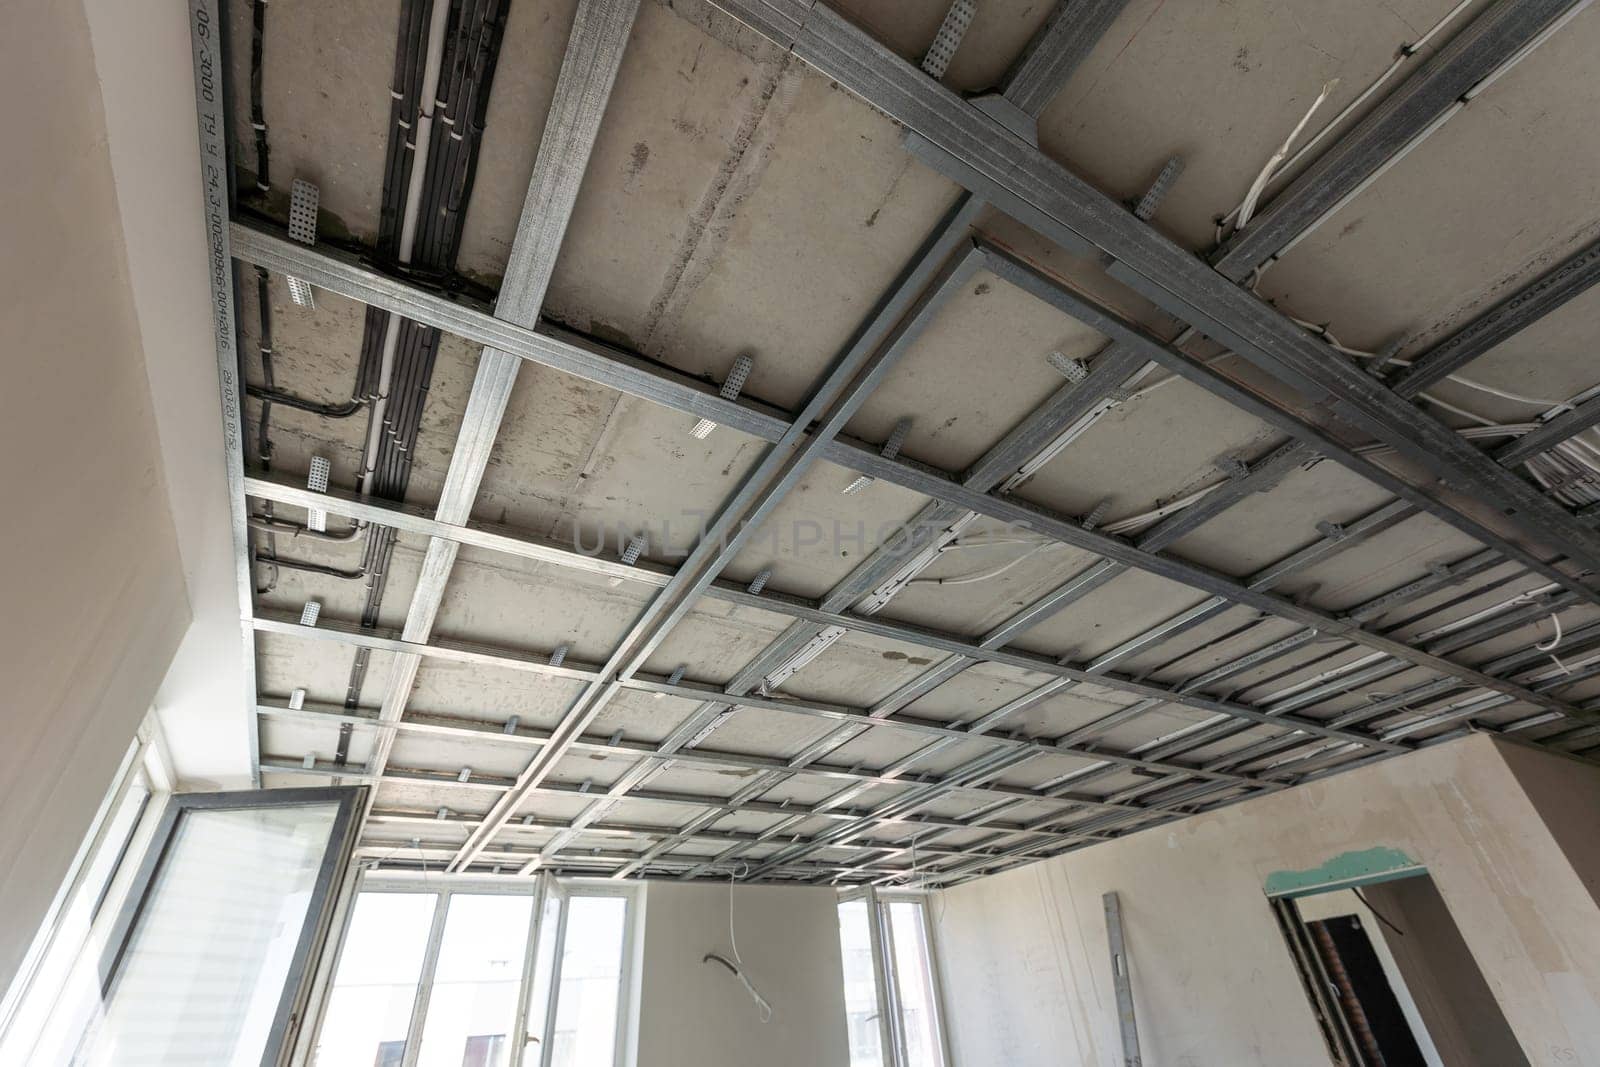 The metal frame of the ceiling, sound insulation, in the process of repairing an apartment. High quality photo